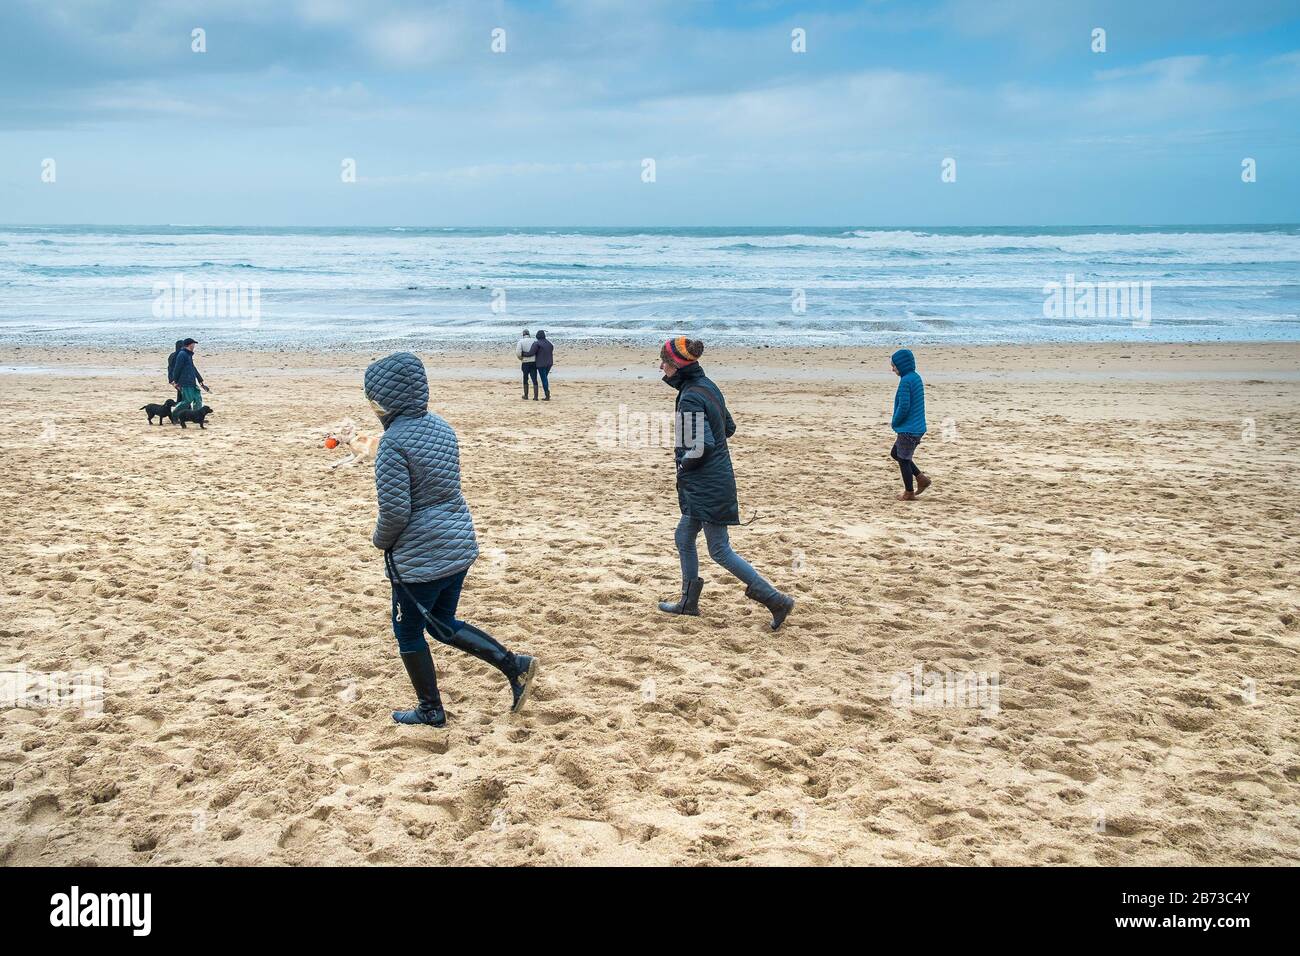 People enjoying a brisk walk despite the cold freezing windy weather conditions on Fistral Beach in Newquay in Cornwall. Stock Photo